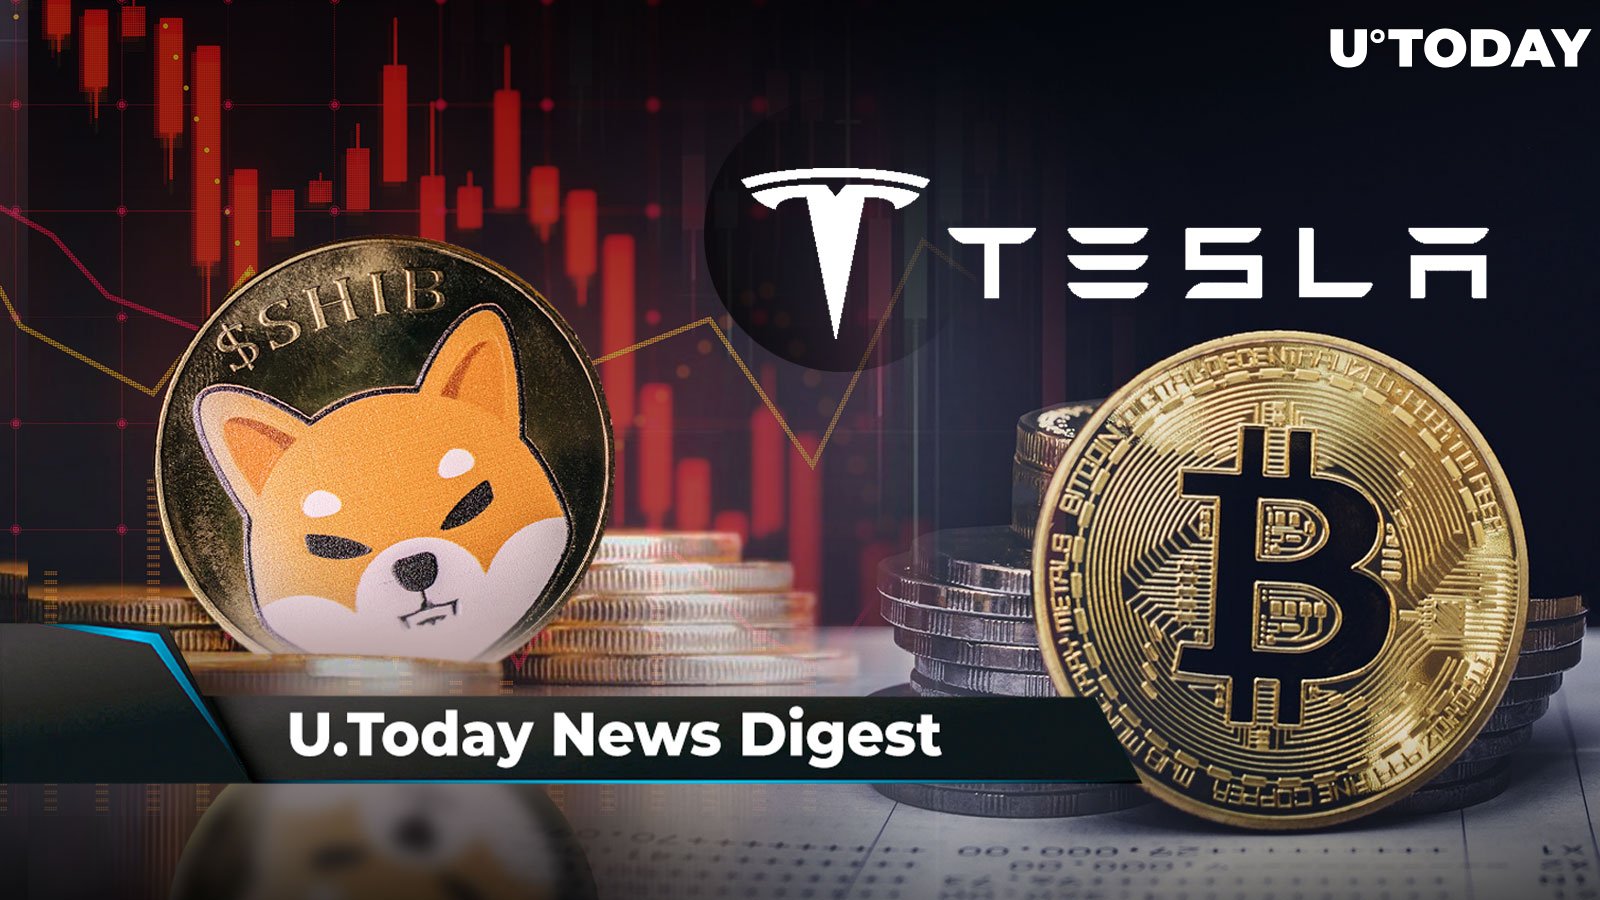 Shiba Inu on the Verge of Collapse, Tesla's Bitcoin Holdings and Elon Musk's SpaceX Discovered, Giant 97,276 ETH Purchase Stuns Crypto Community: U.Today's Crypto News Digest